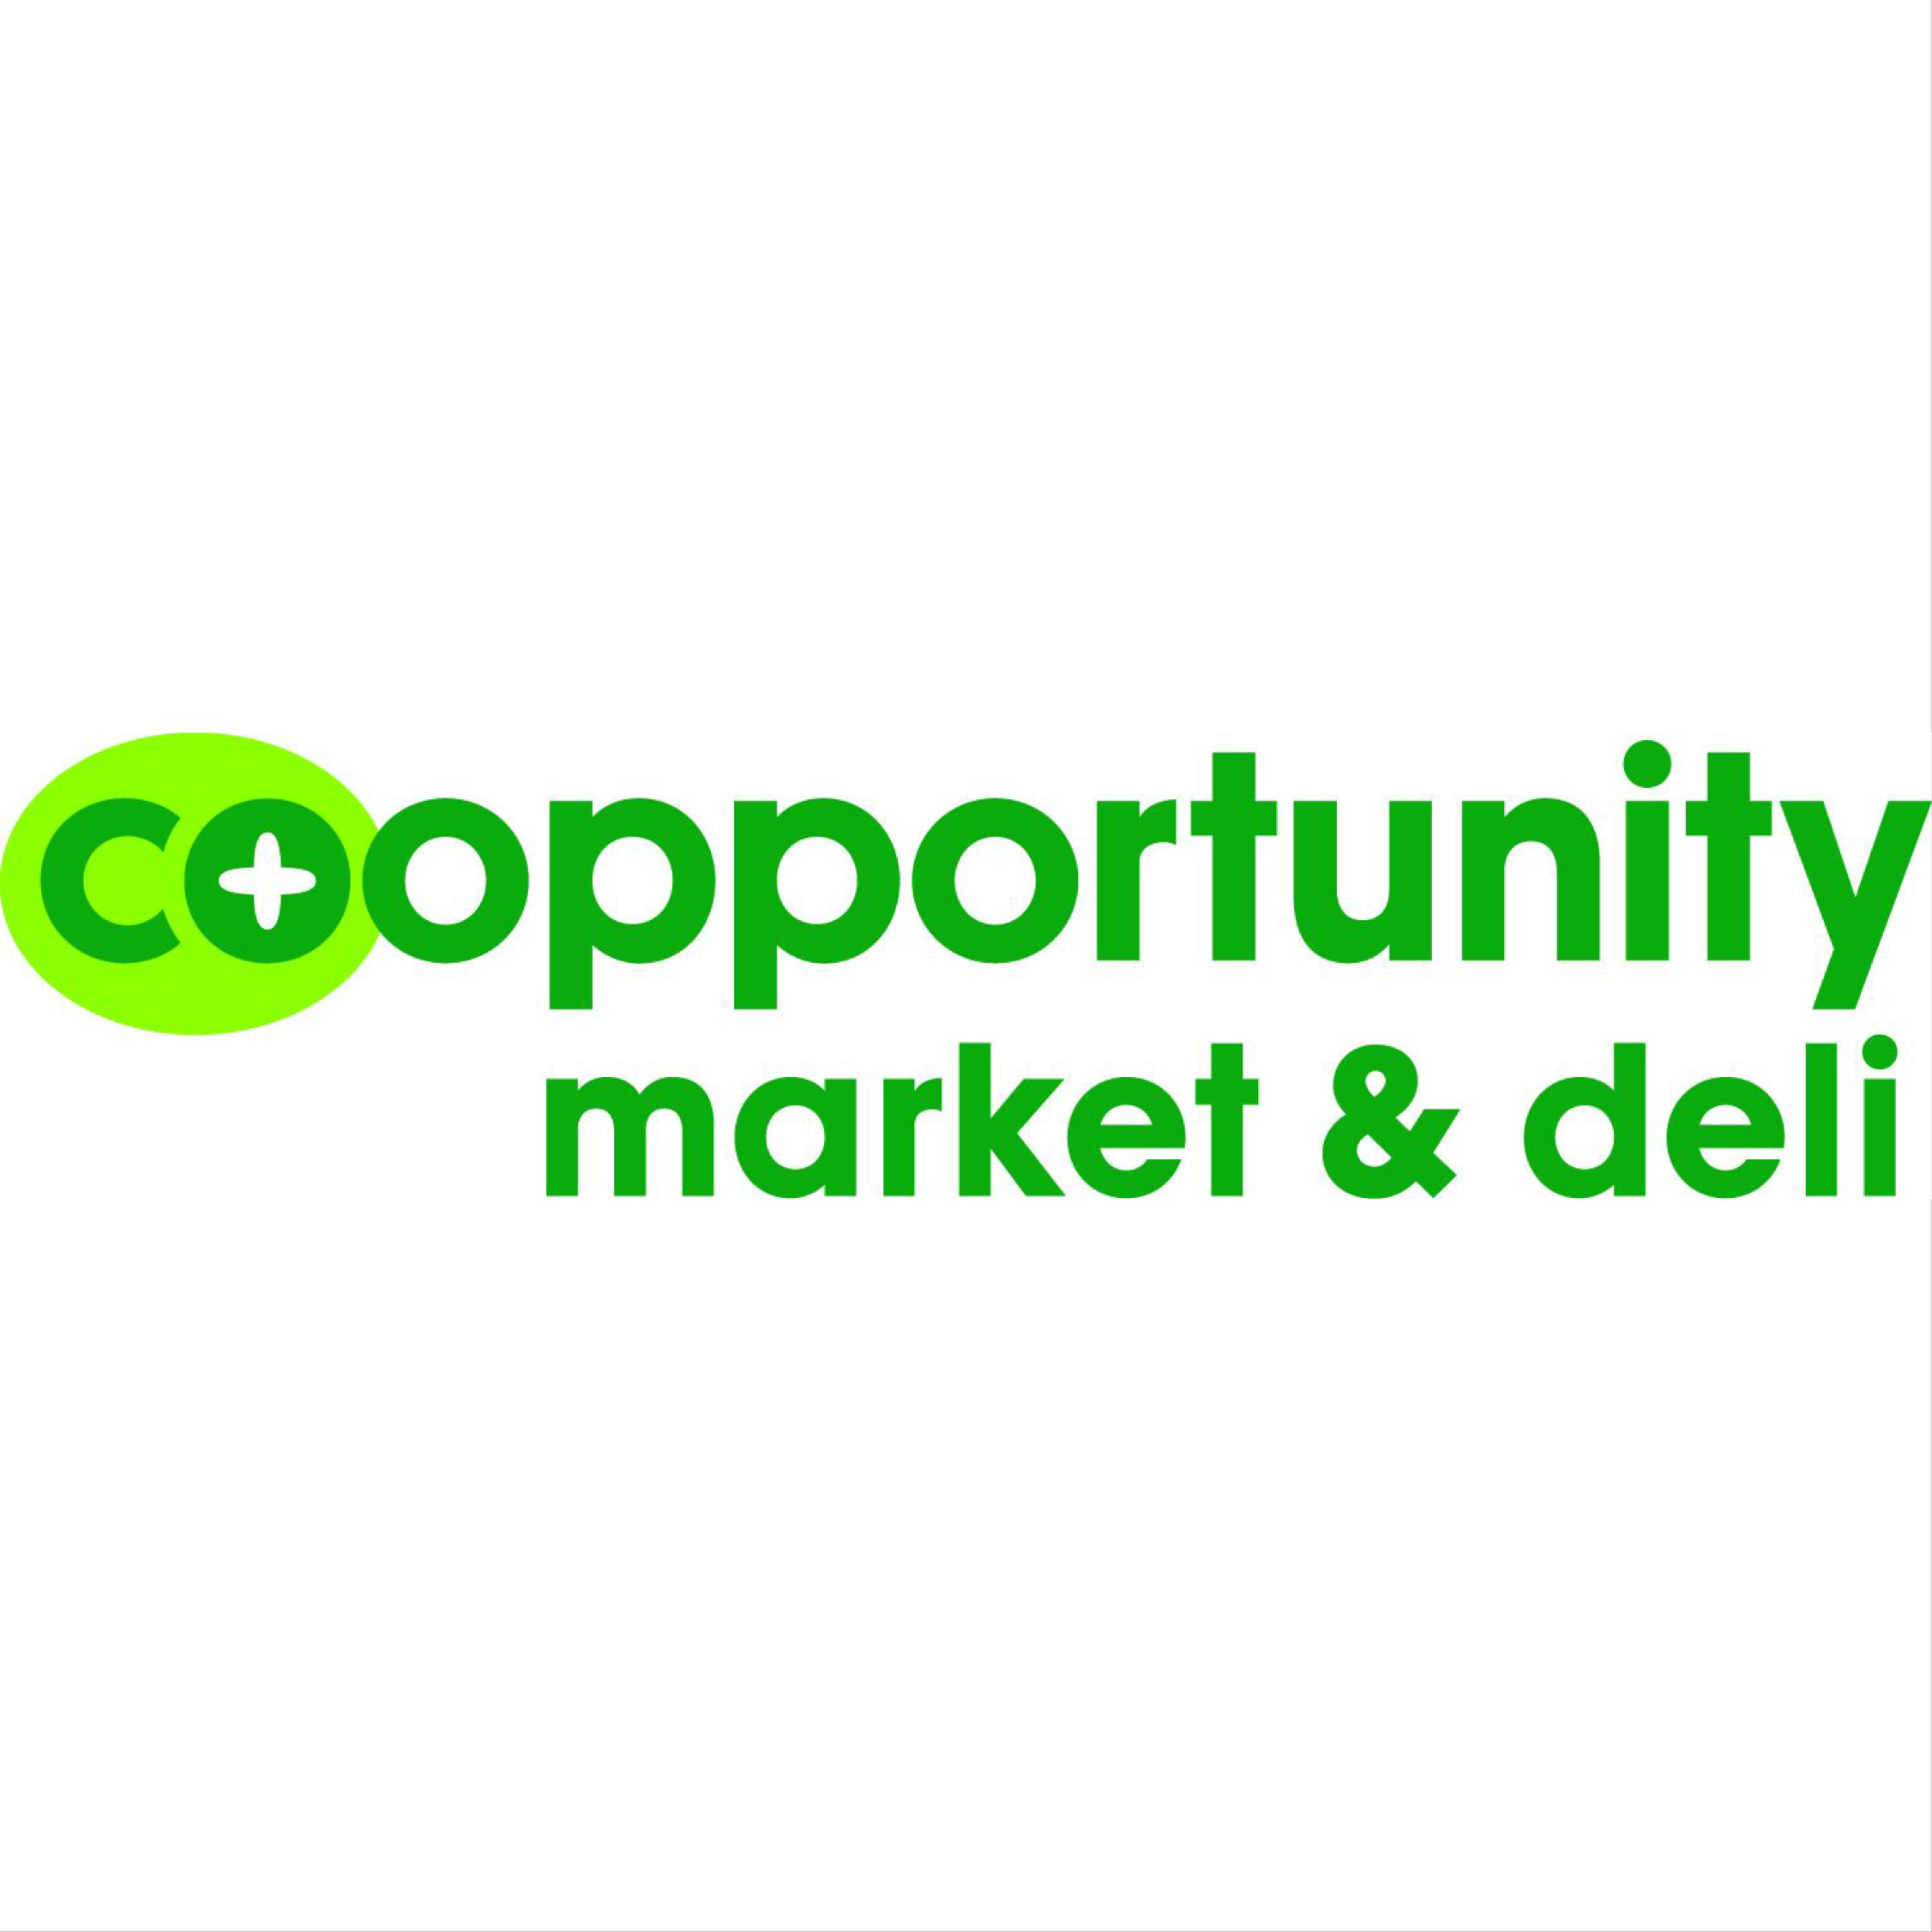 coopportunity